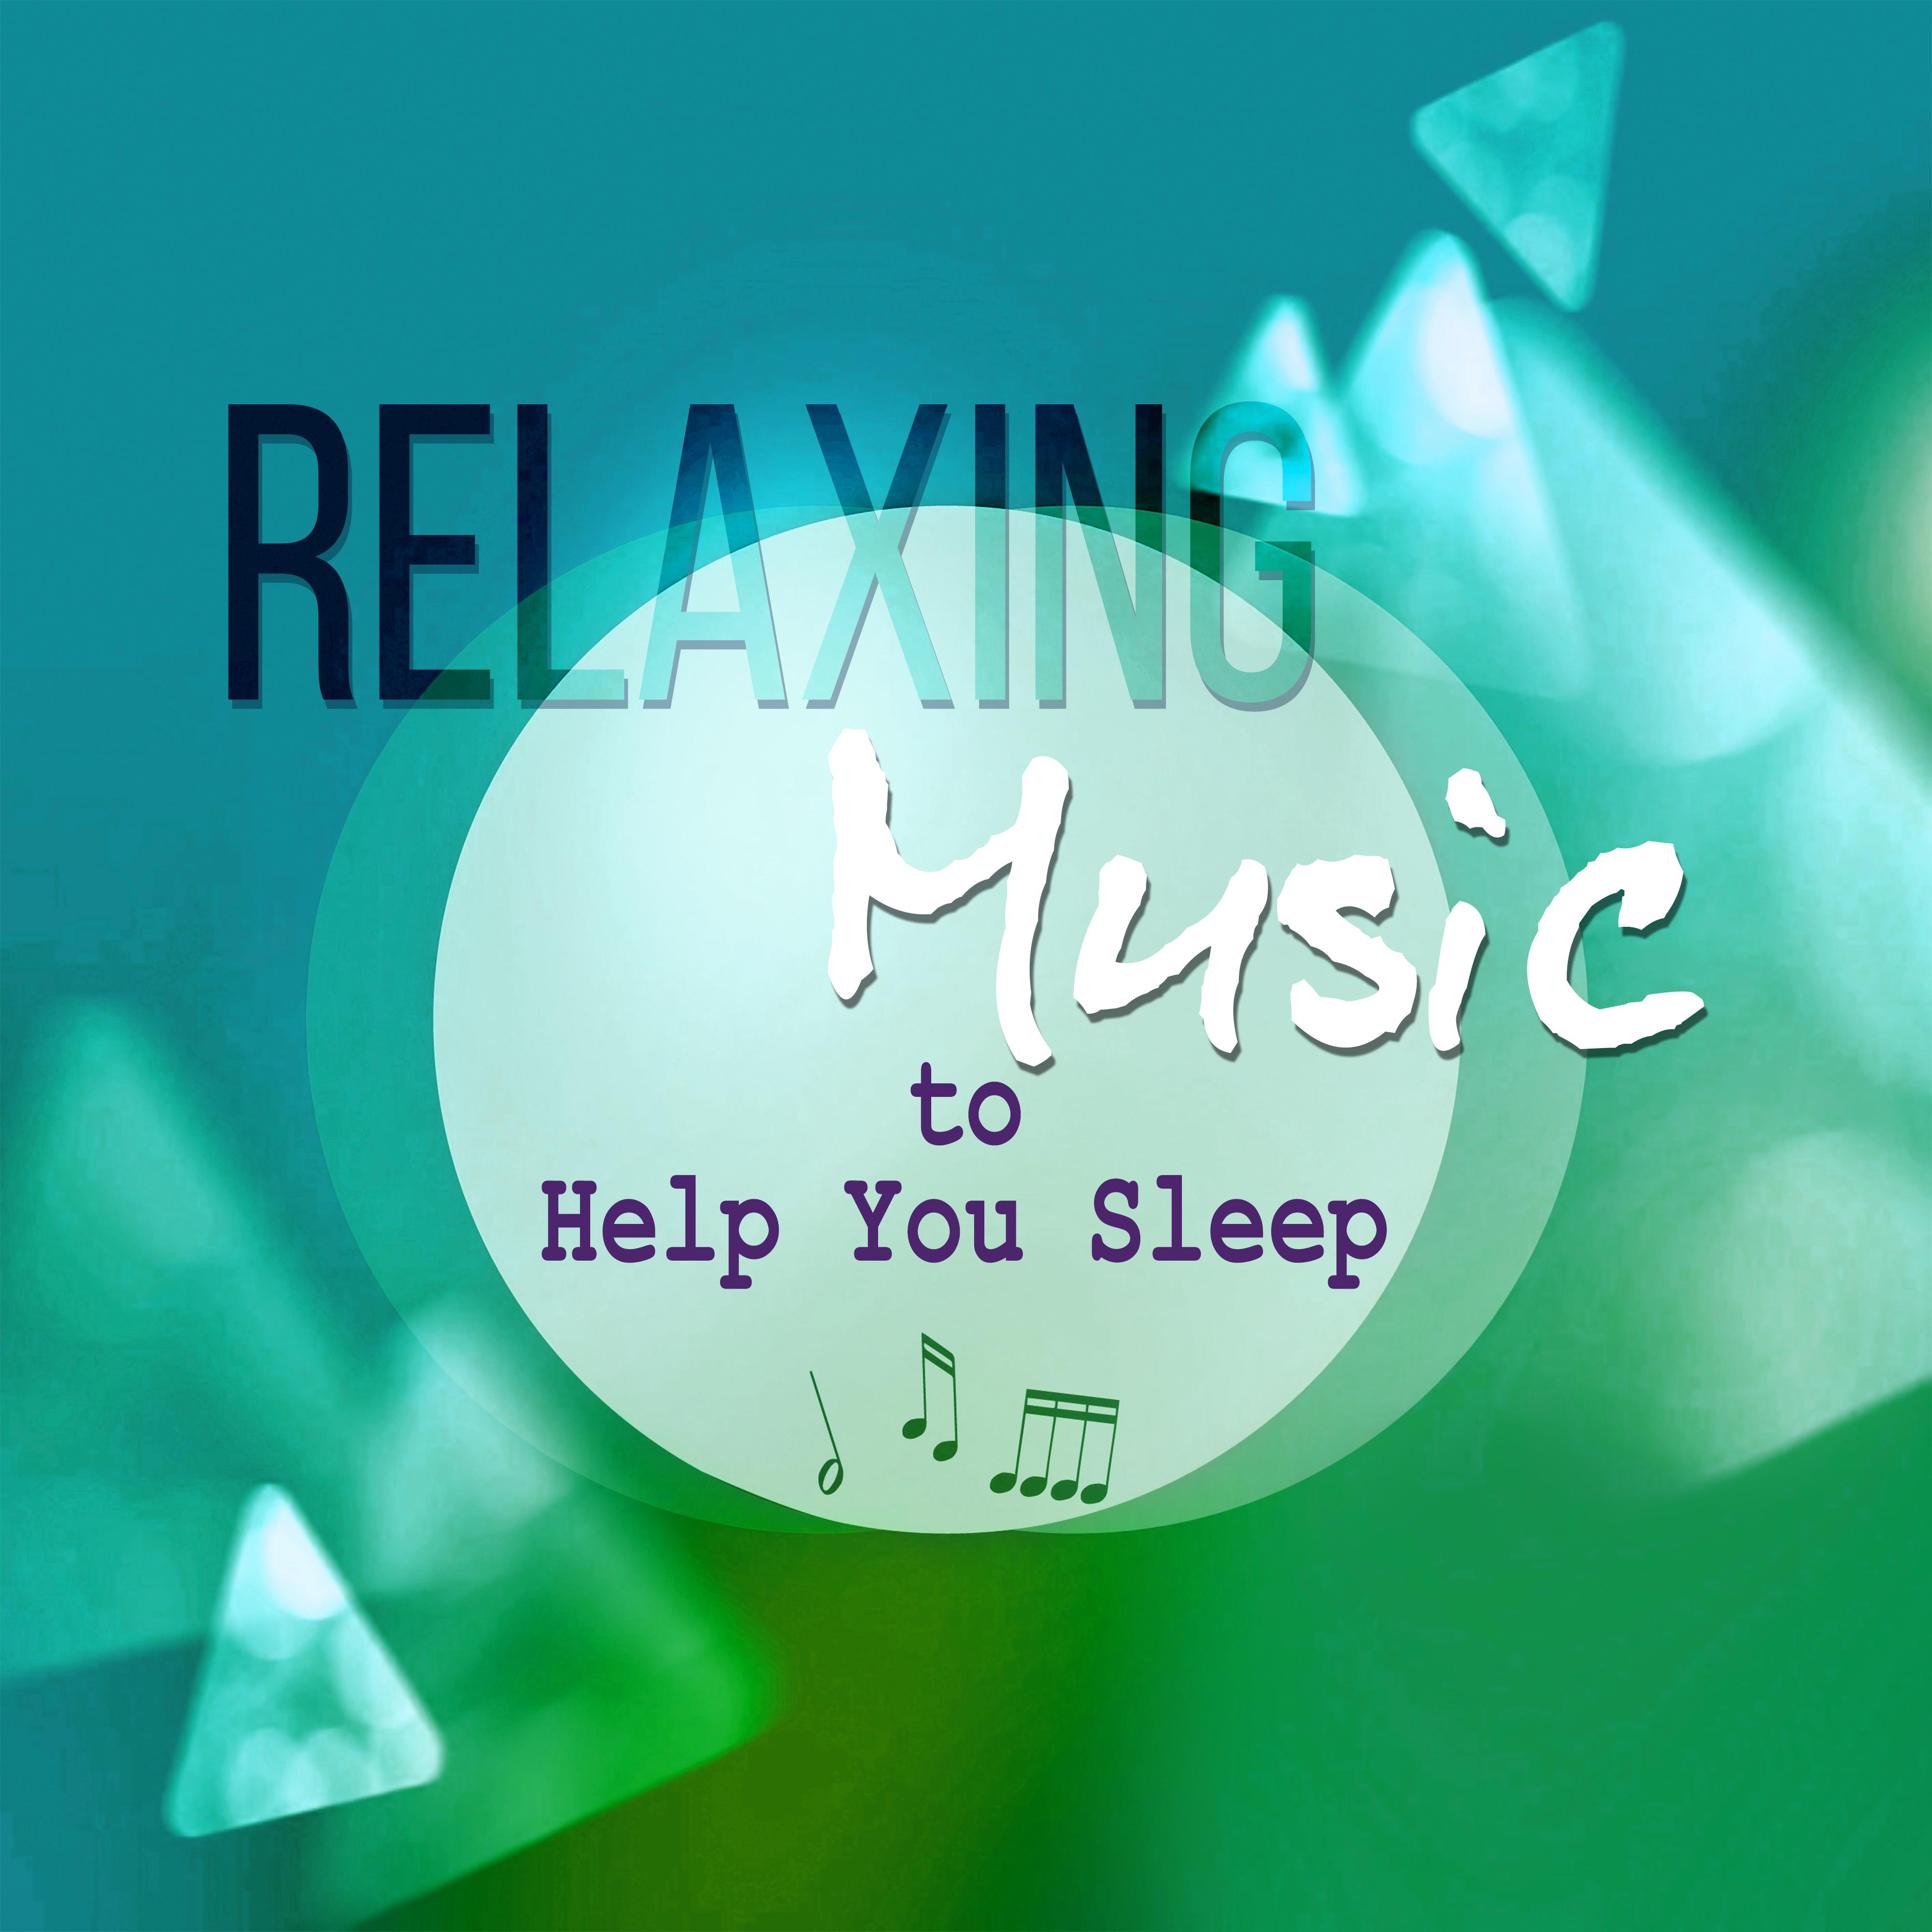 Relaxing Music to Help You Sleep – Relaxing Piano Music, Nature Sounds Lullabies to Meditate and Calm Down, Natural White Noise, Songs to Relax & Heal, Baby Massage